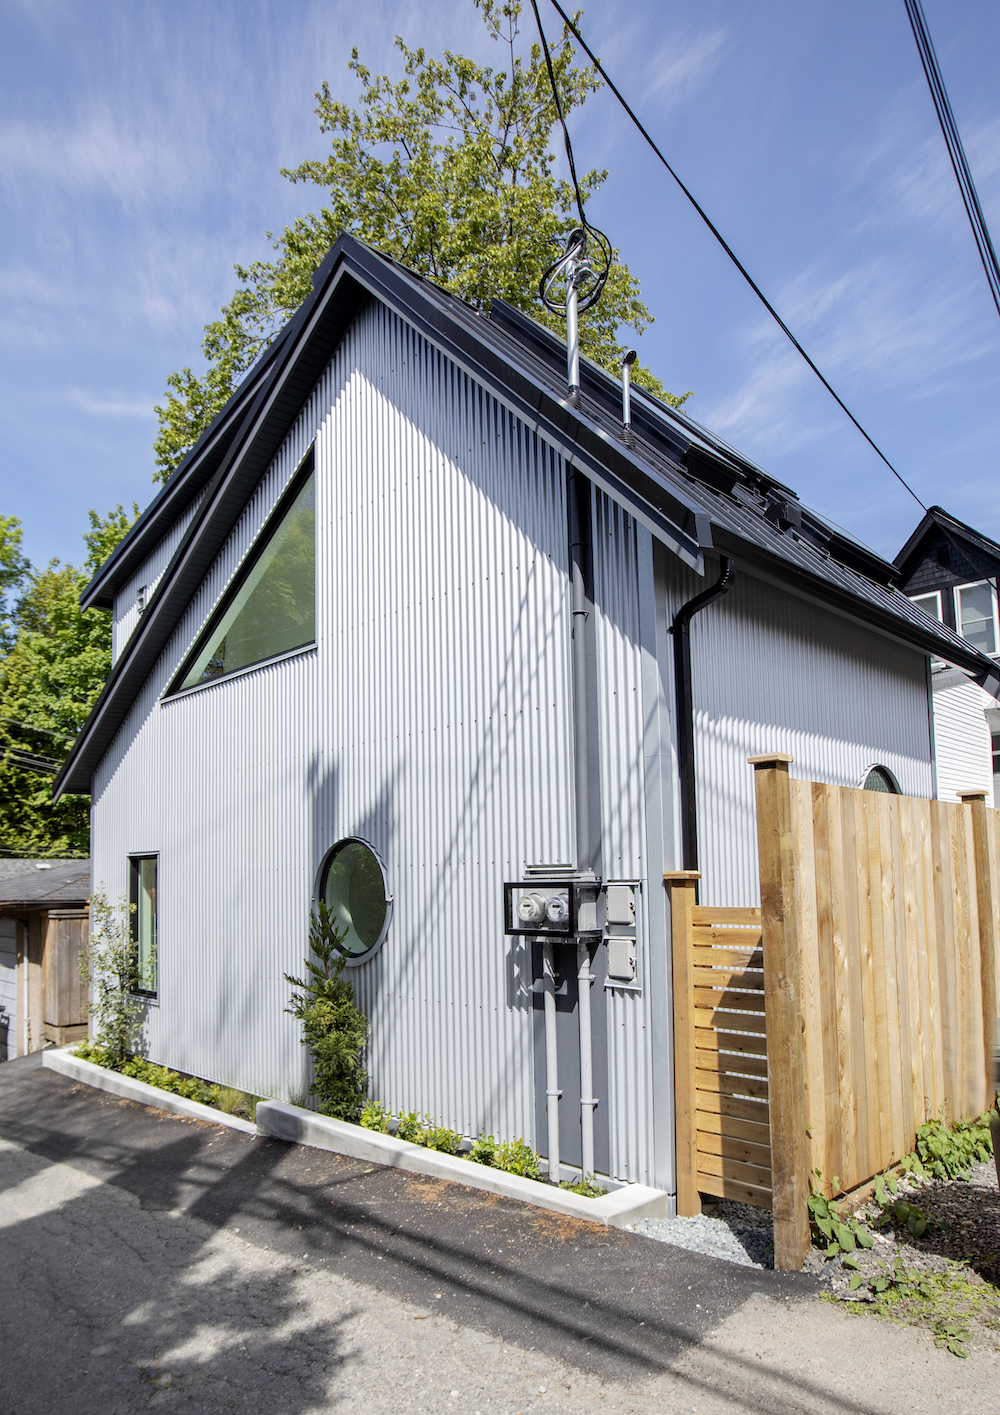 Small laneway house in Vancouver